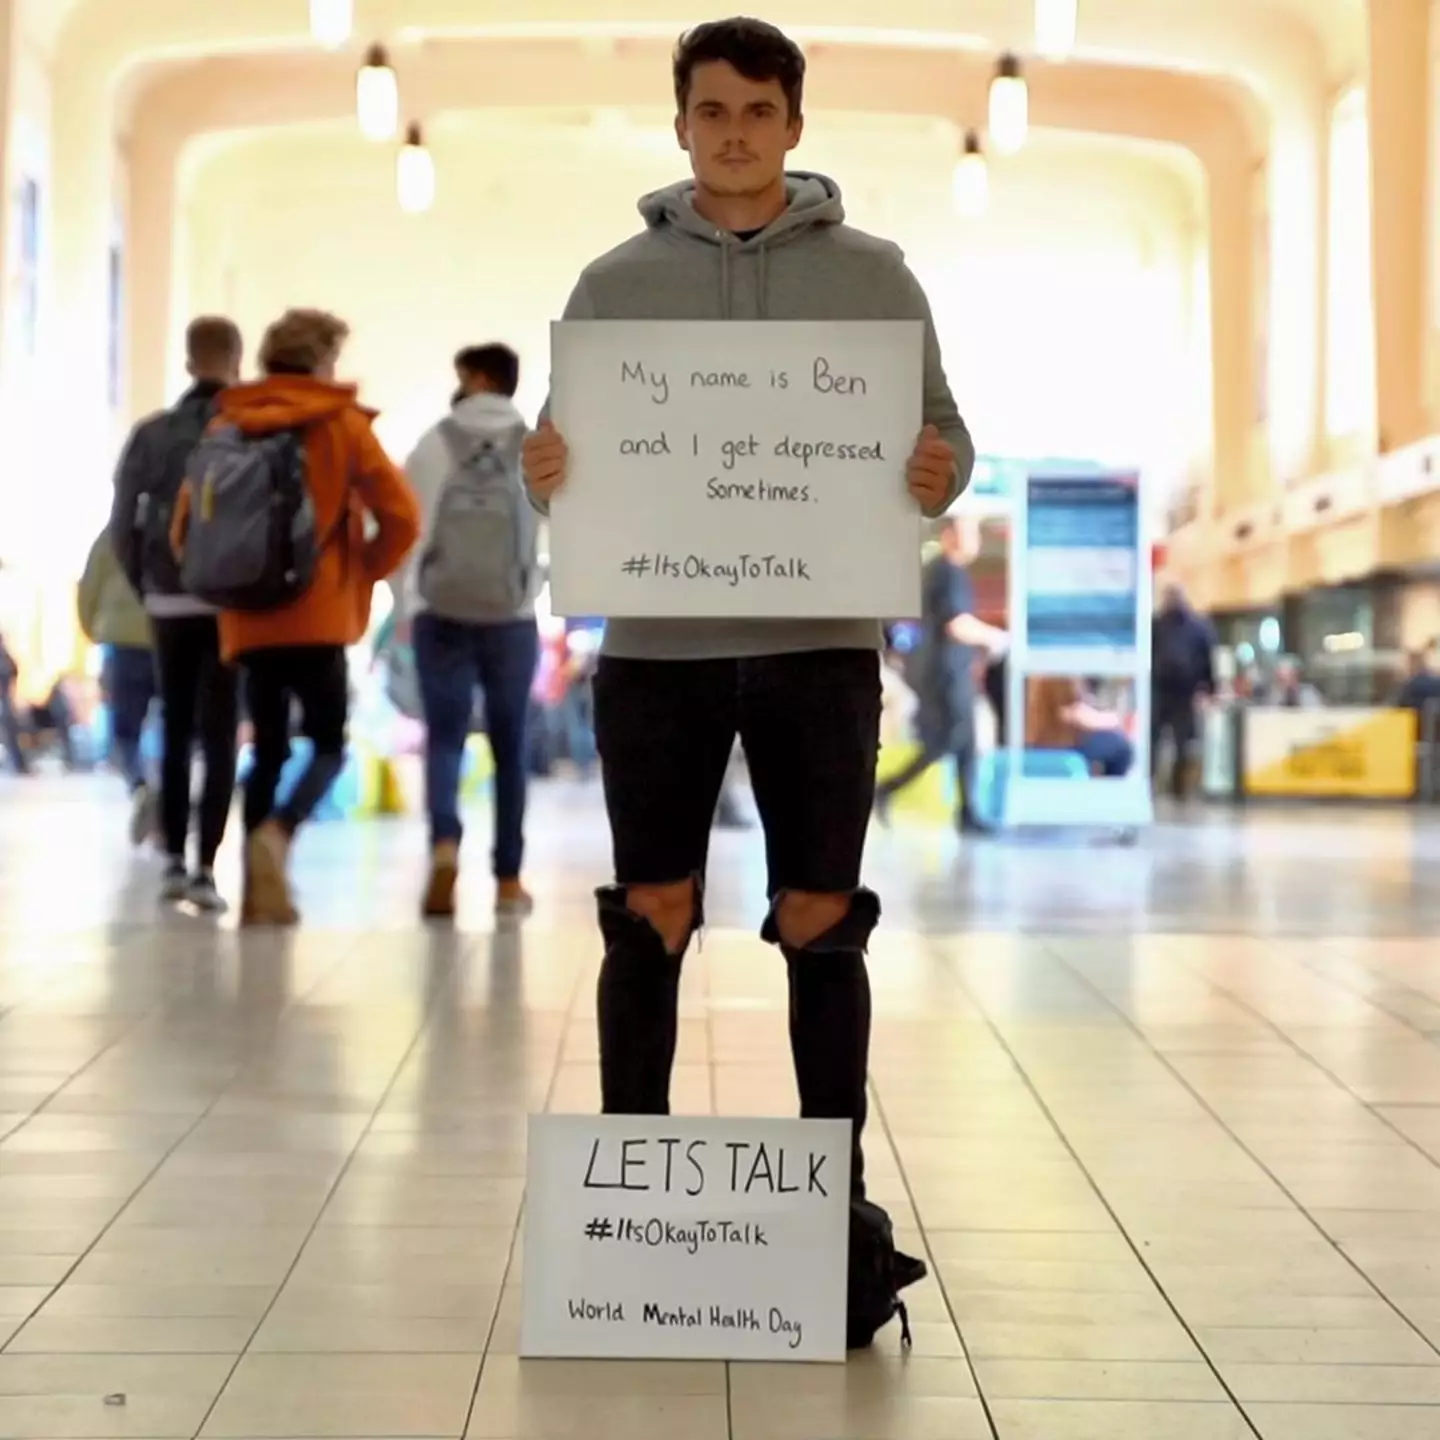 The mental health advocate has been praised by strangers for encouraging people to open up.